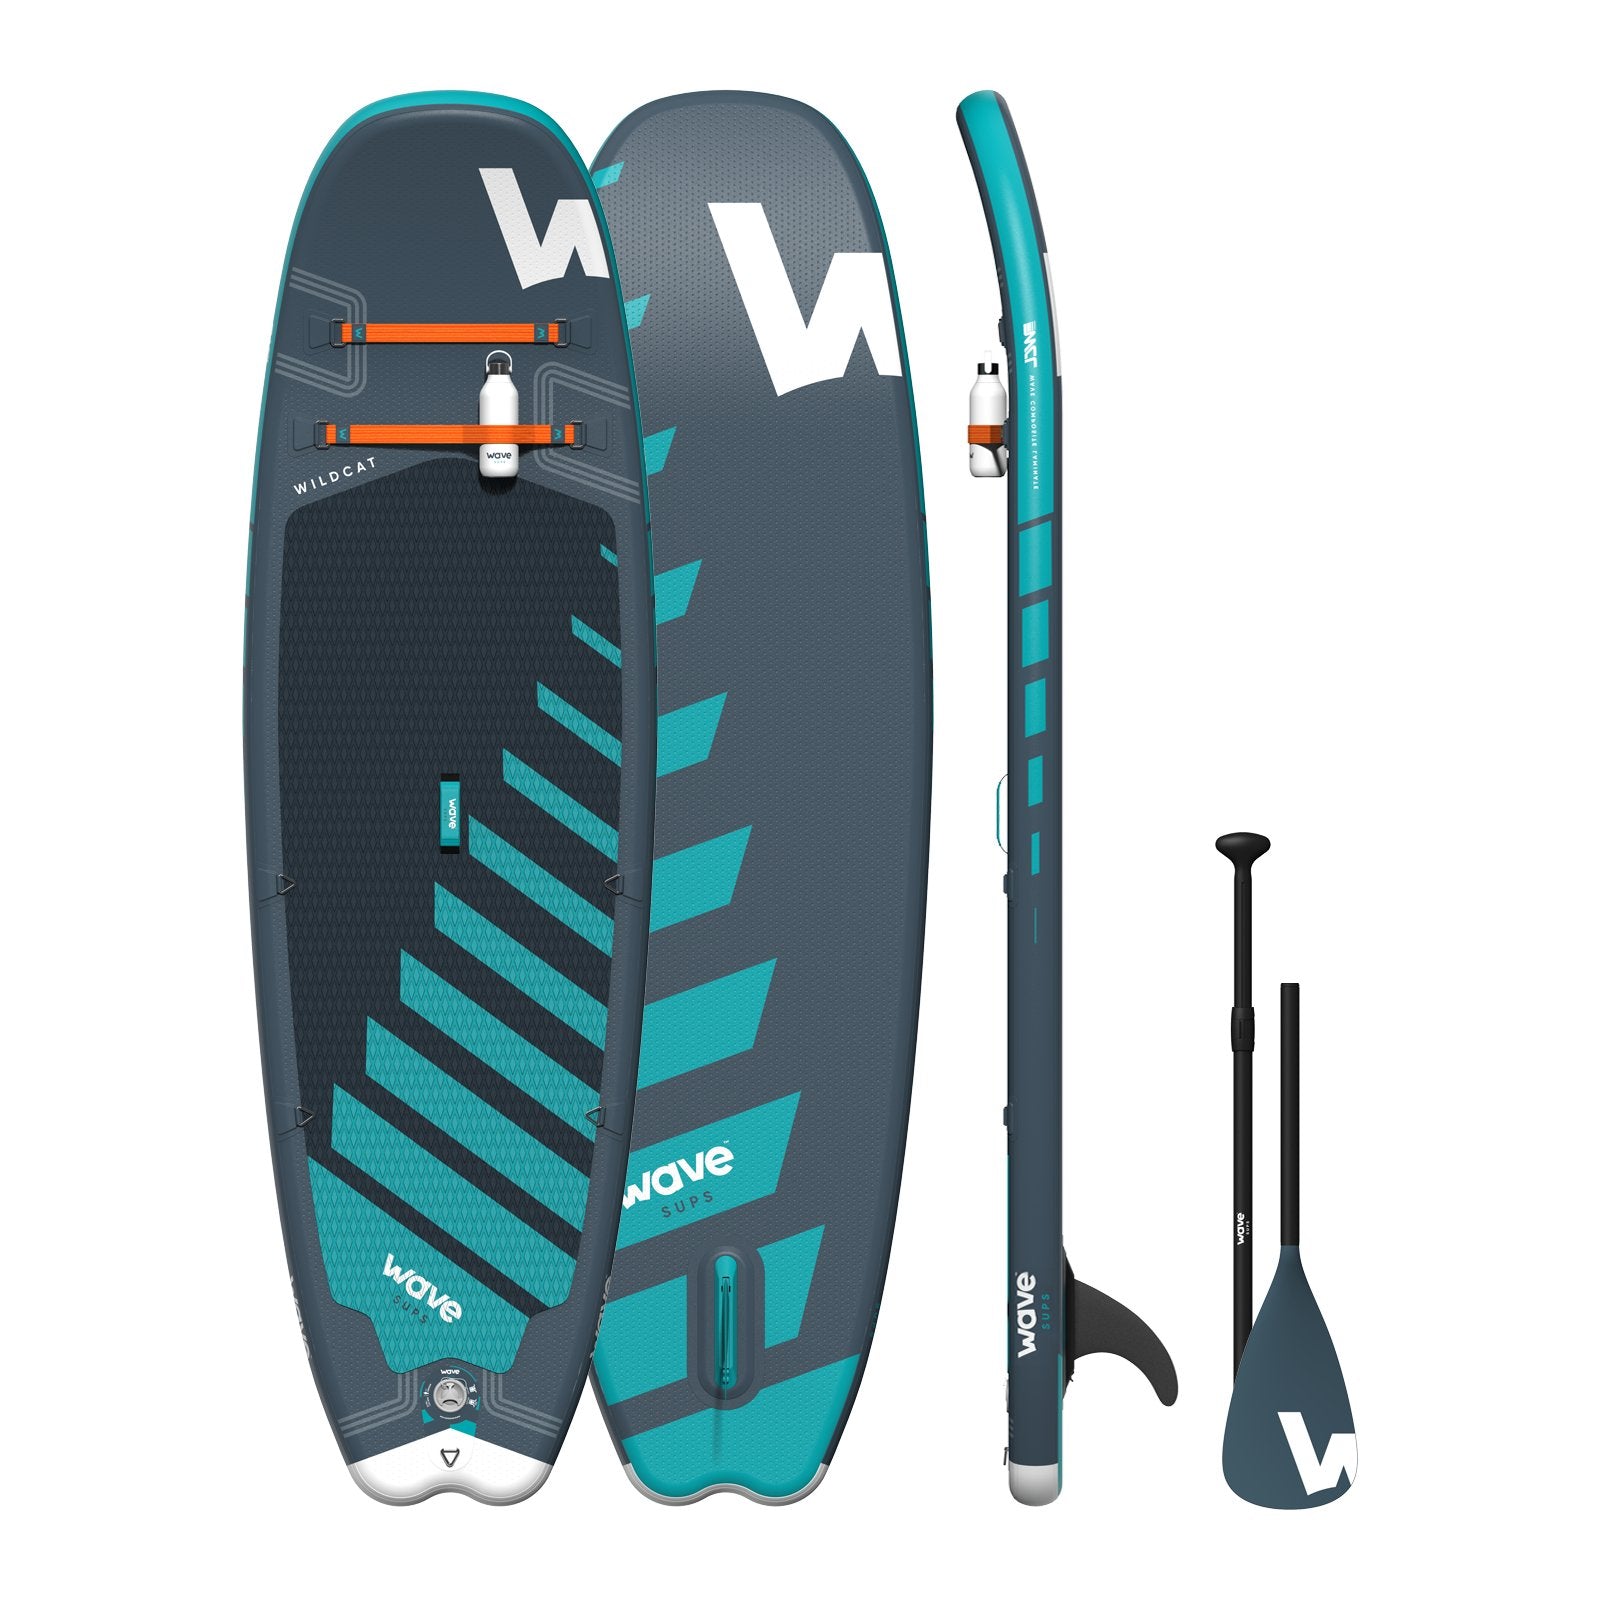 Wildcat SUP | Inflatable Stand-Up Paddleboard | Surf SUP Package | 8.6ft | Navy - Wave Sups UK